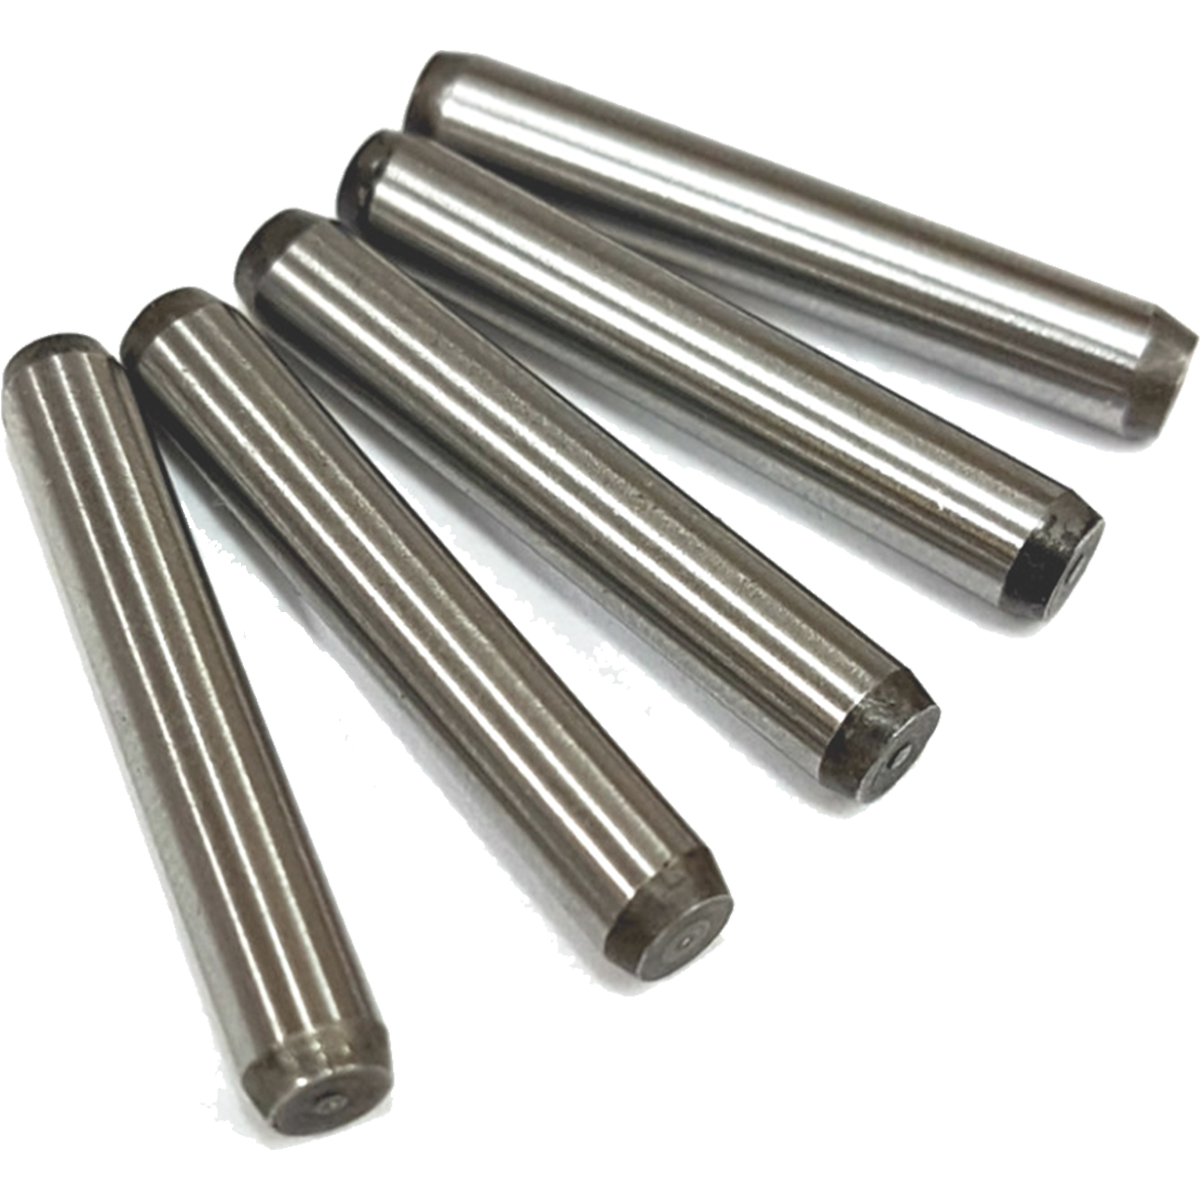 Precision ground metal dowel pins, also known as retaining rod, locating pins, and lock pins